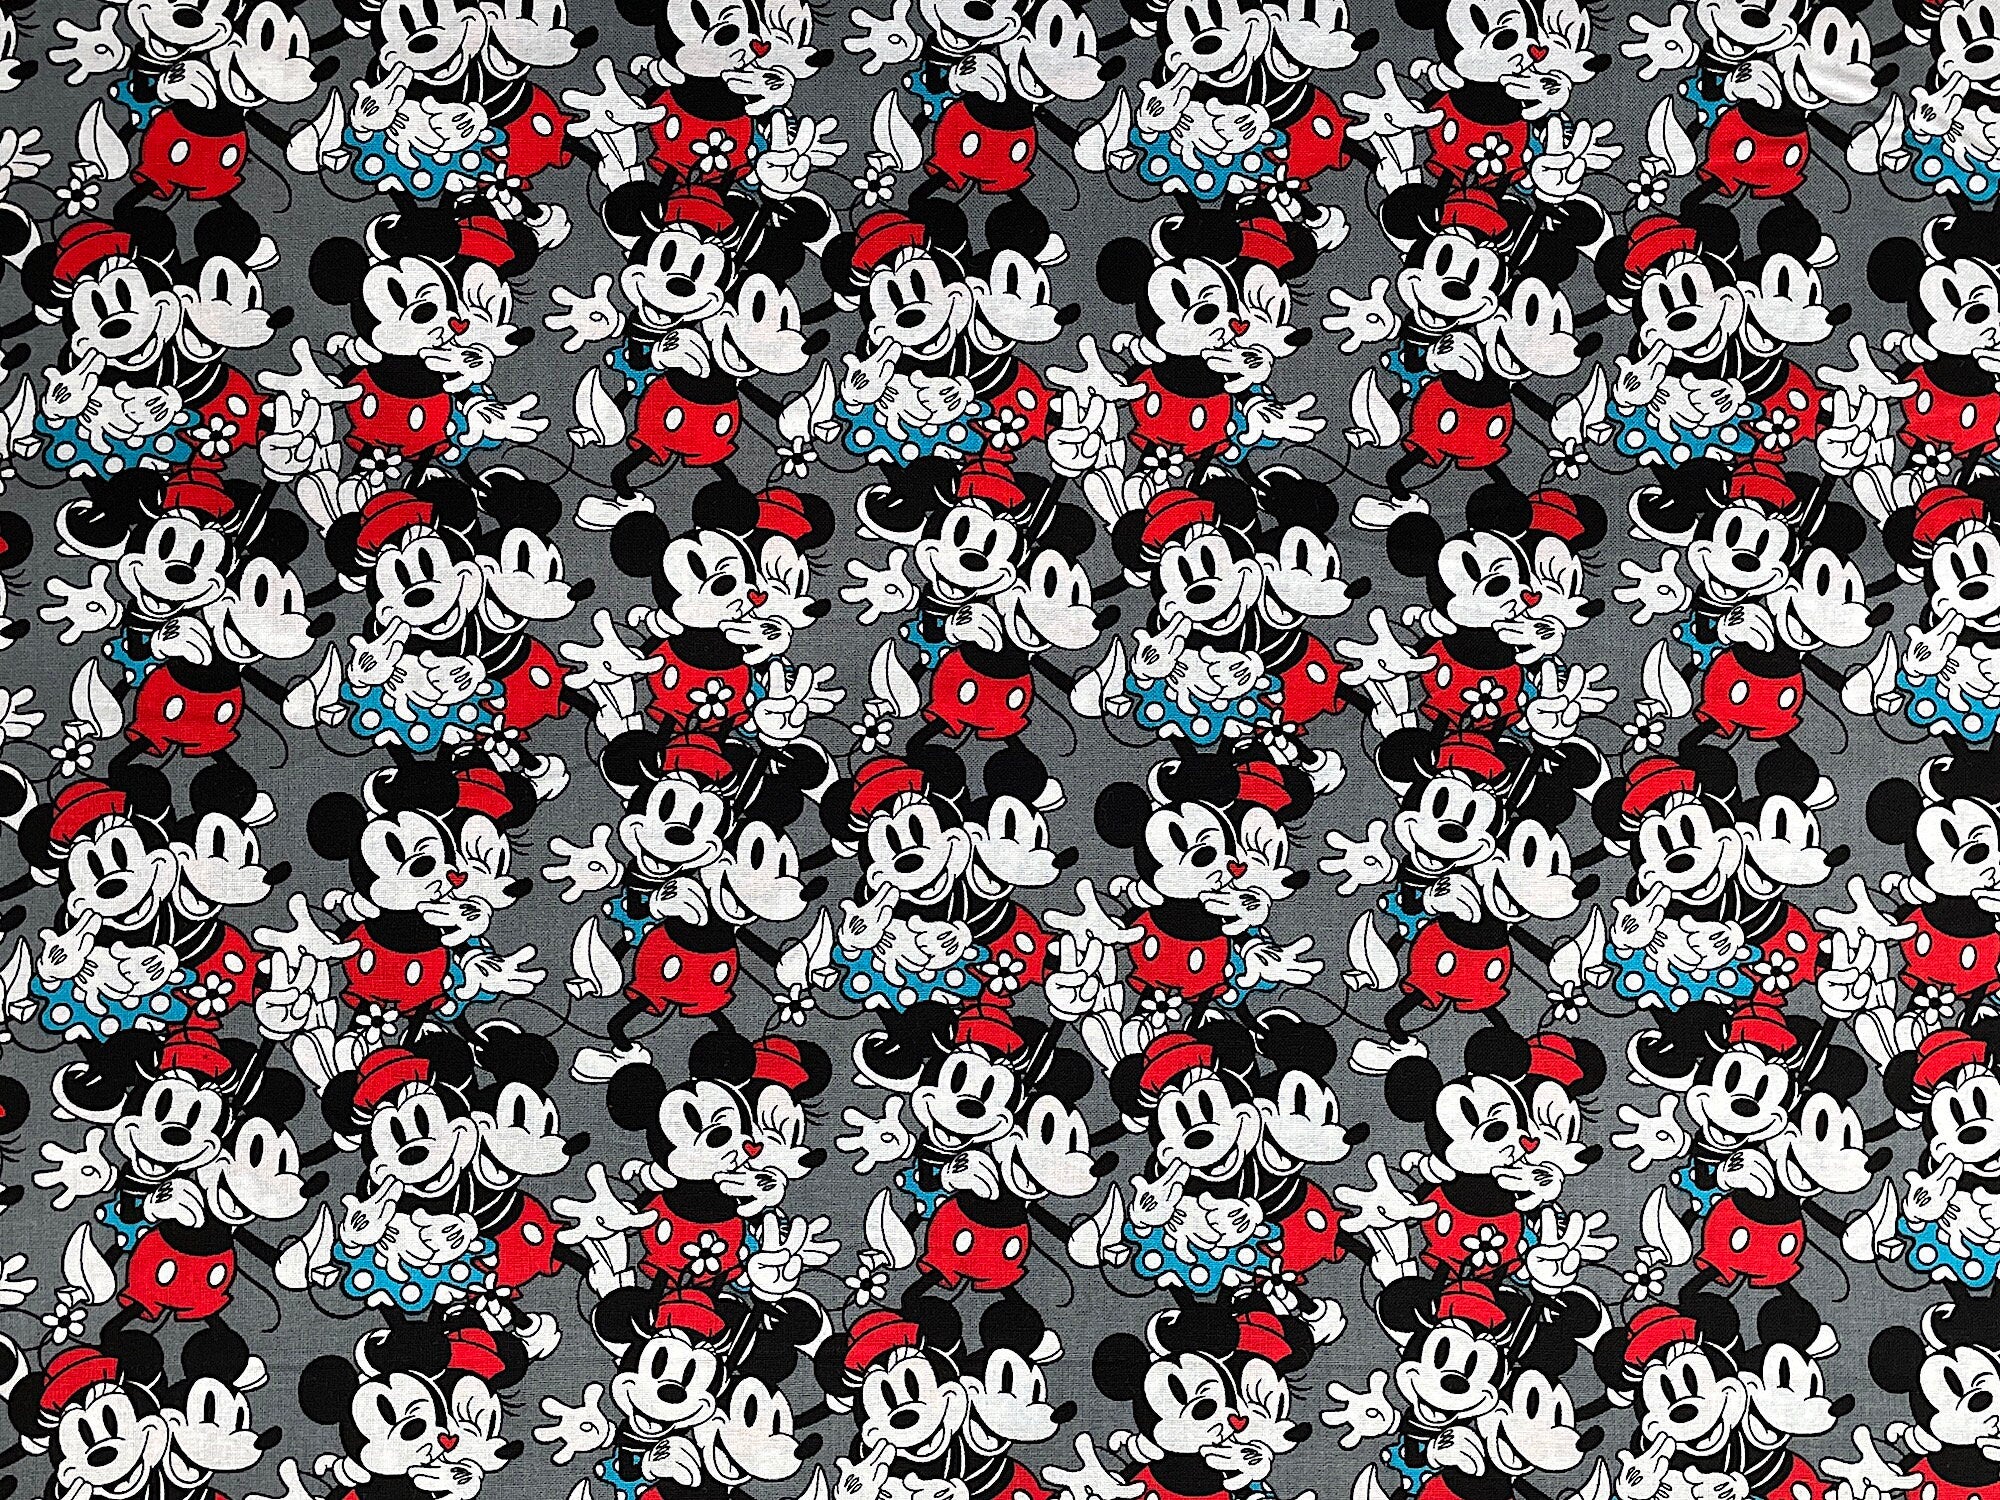 This grey fabric is covered with Mickey and Minnie Mouse. This vintage fabric features Mickey and Minnie in love. Minnie is wearing a turquoise dress and red hat and Mickey has red shorts and a black shirt.